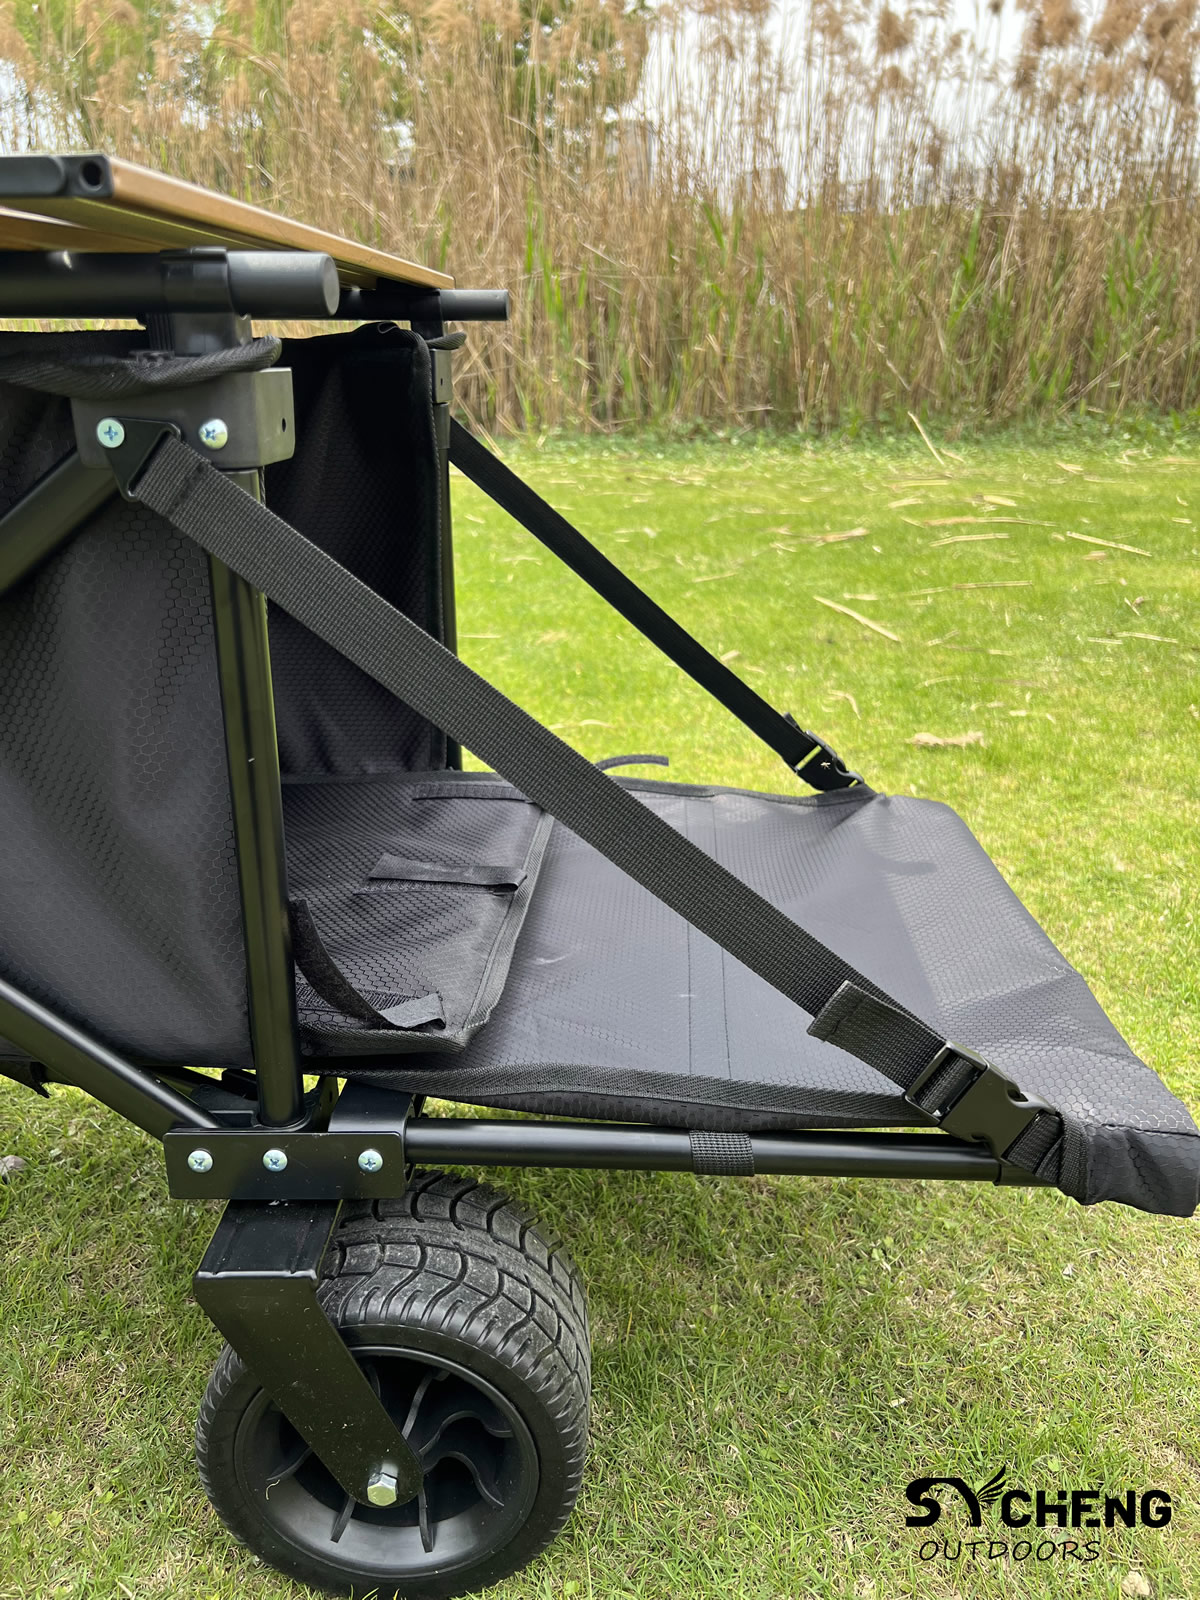 SYCHENG Outdoor Collapsible Wagon Utility Folding Cart Heavy Duty All Terrain Wheels for Shopping Camping Garden with Side Bag 